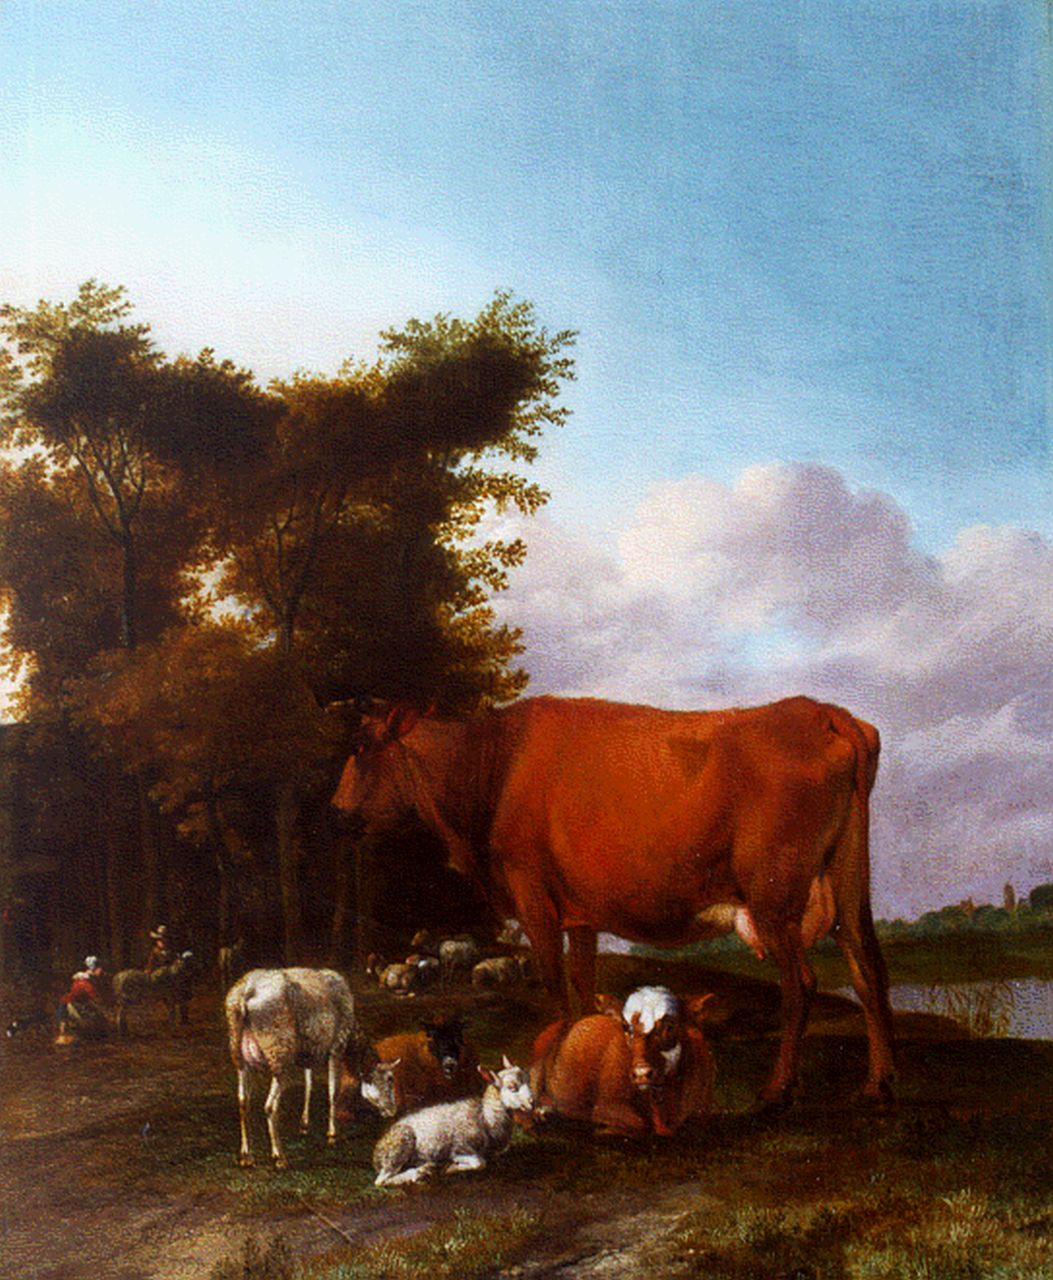 Janz Klomp A.  | Albert Janz Klomp, Cattle in a river landscape, oil on panel 42.7 x 35.5 cm, signed l.l. and dated 1662